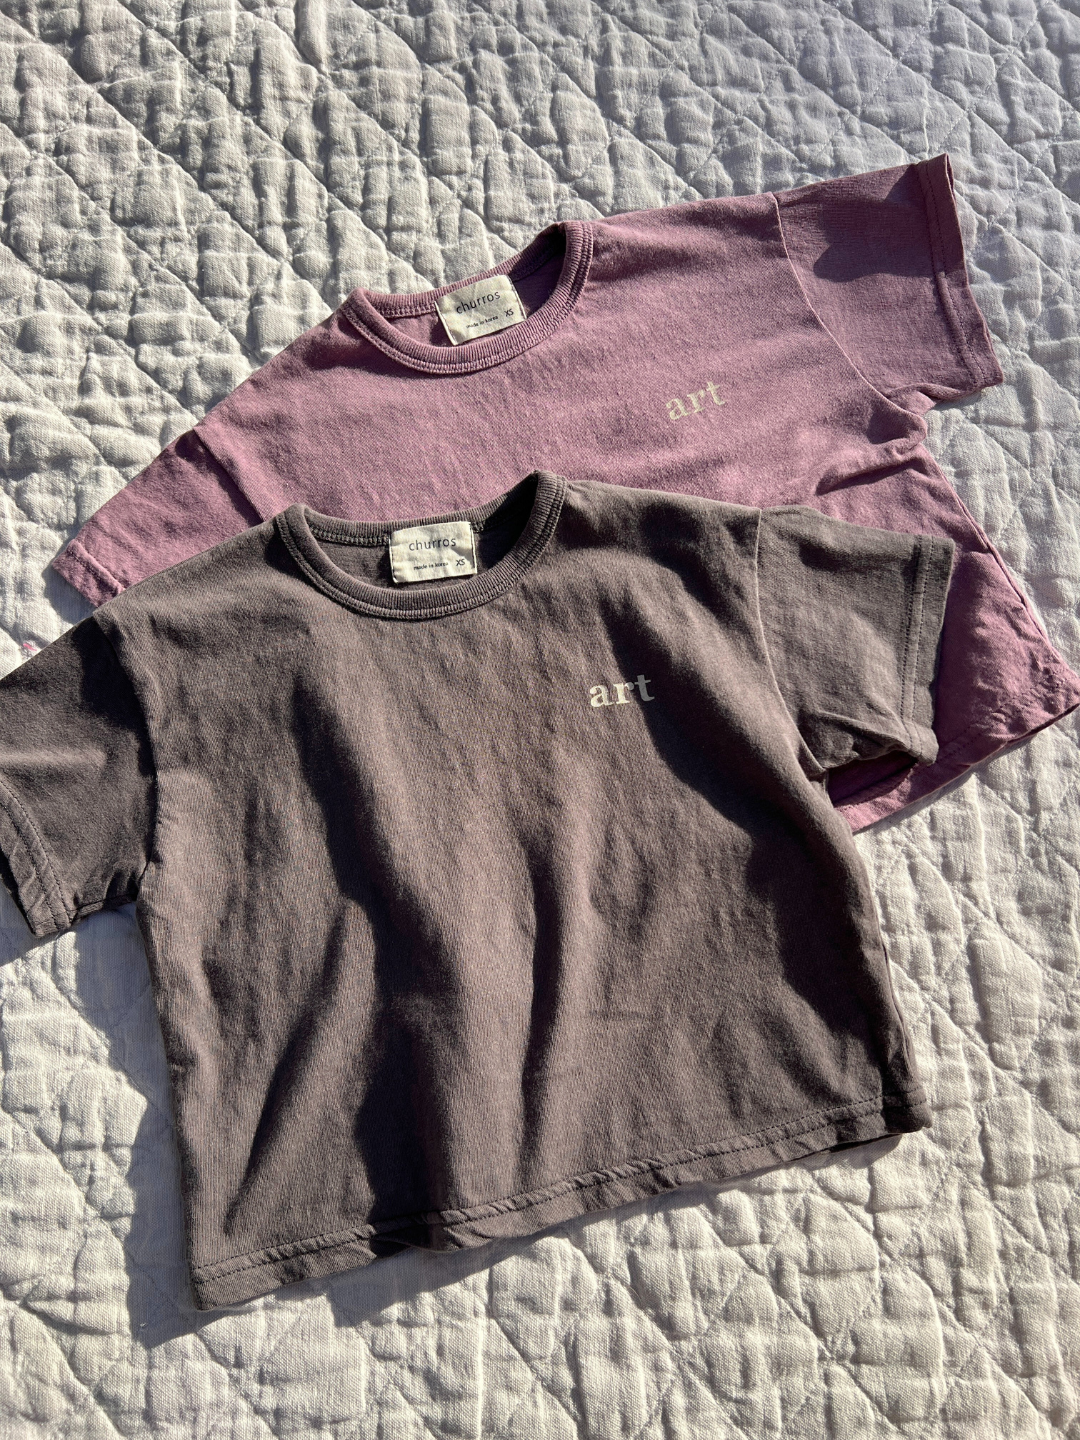 Two kids' Studio tees laid flat on a quilt in the sun